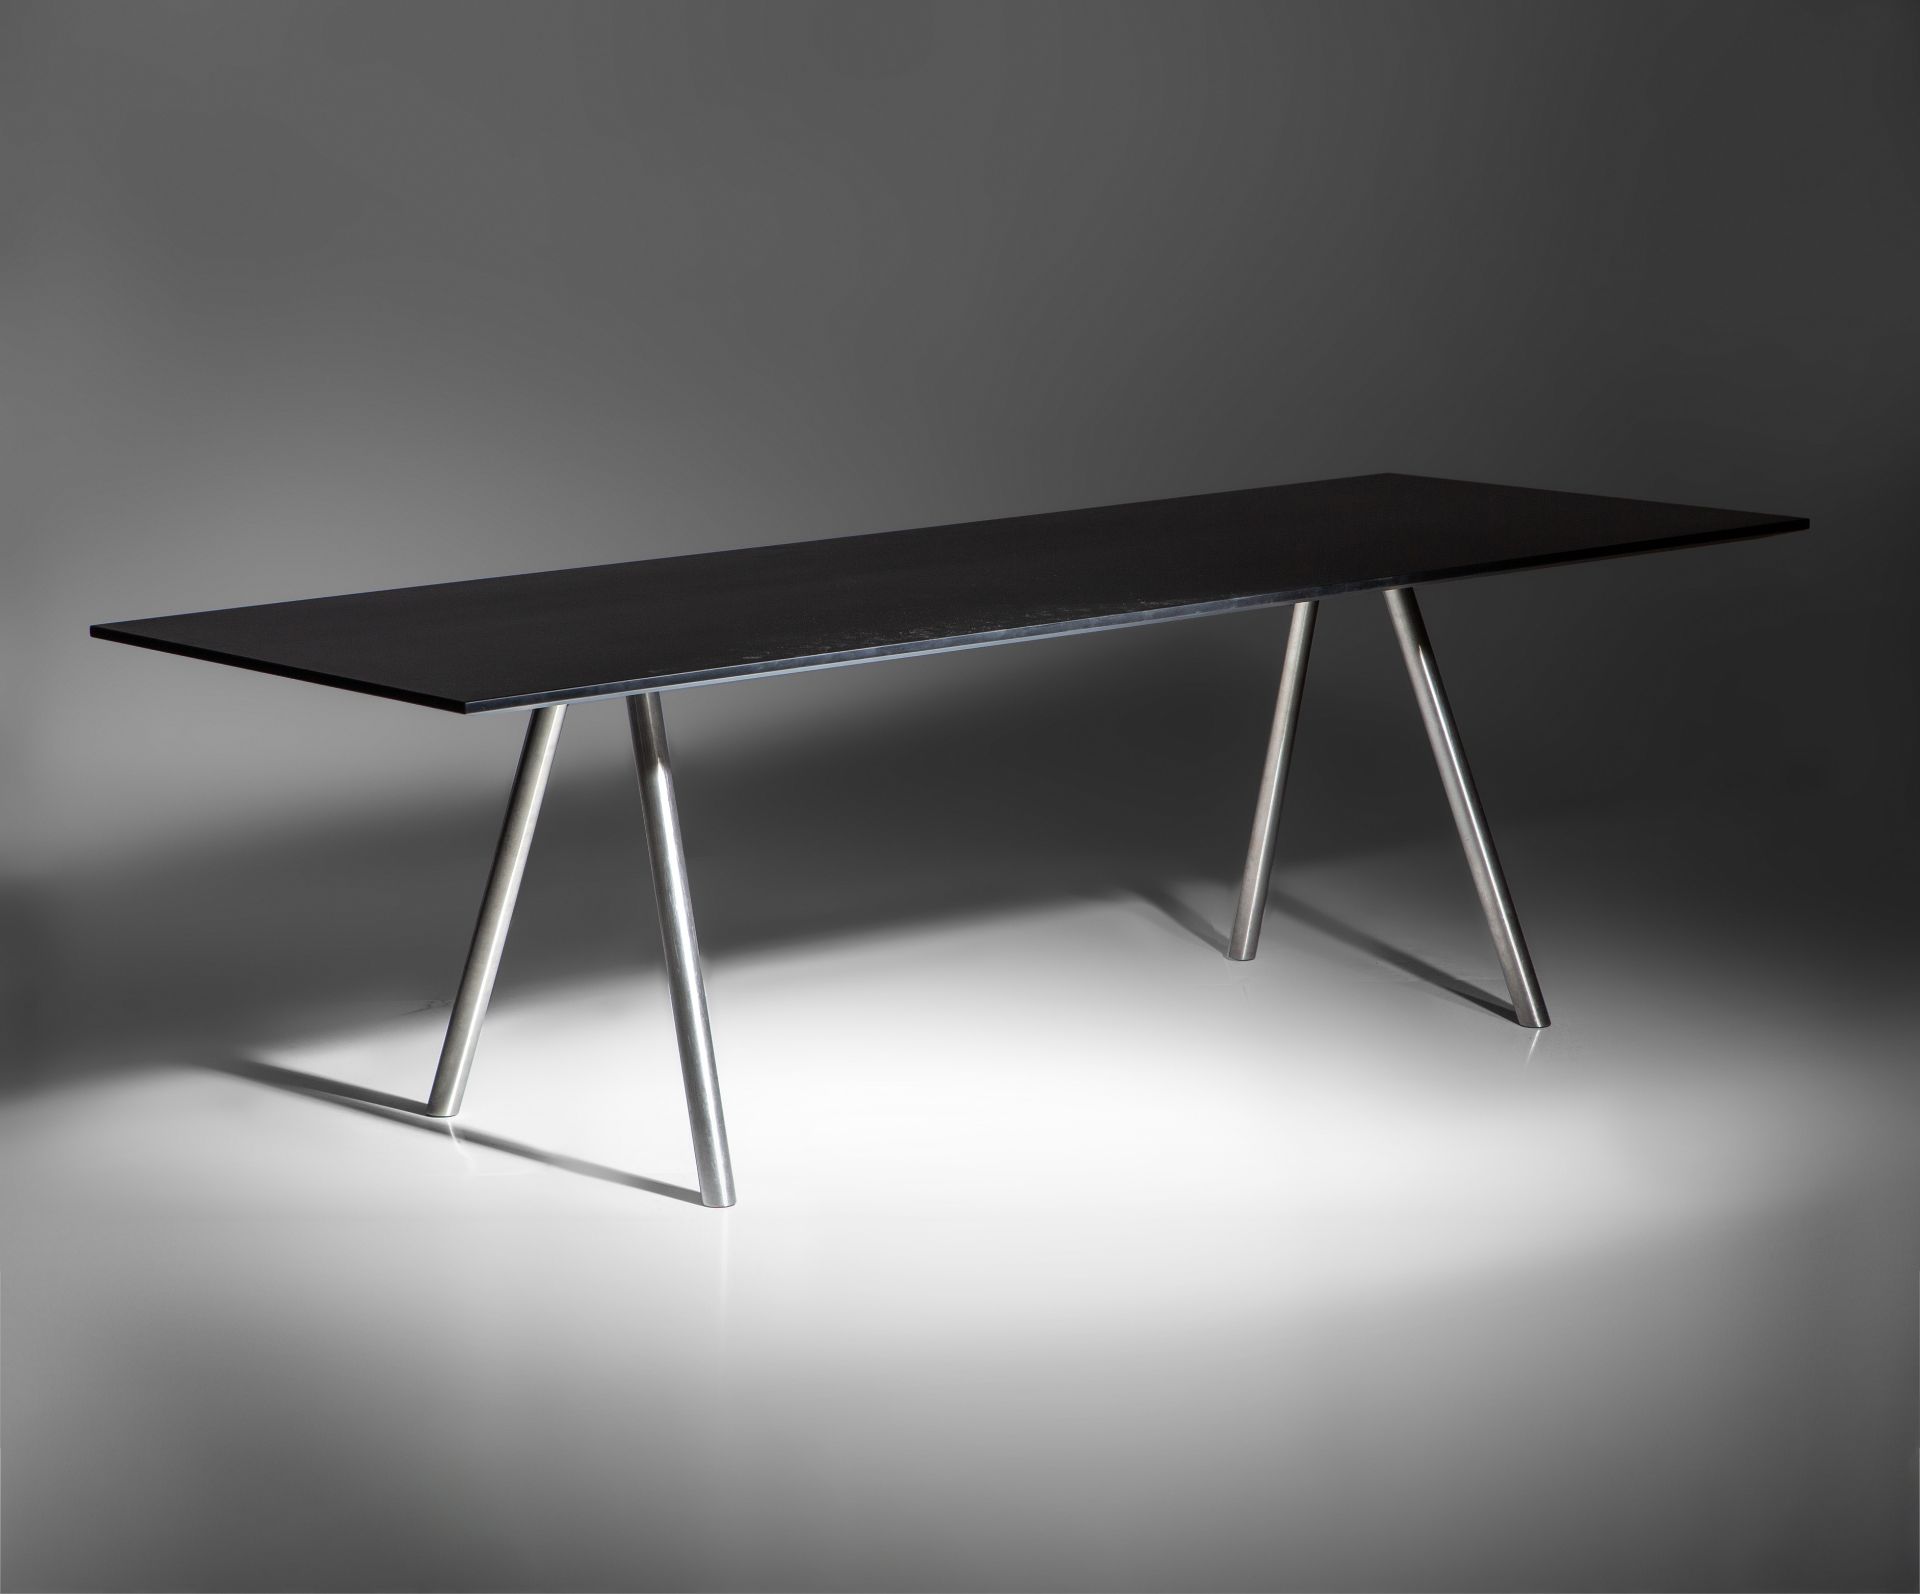 An A-Table by Maarten van Severen for Vitra, H 72,5 - W 240 - D 90 cm - Image 13 of 22